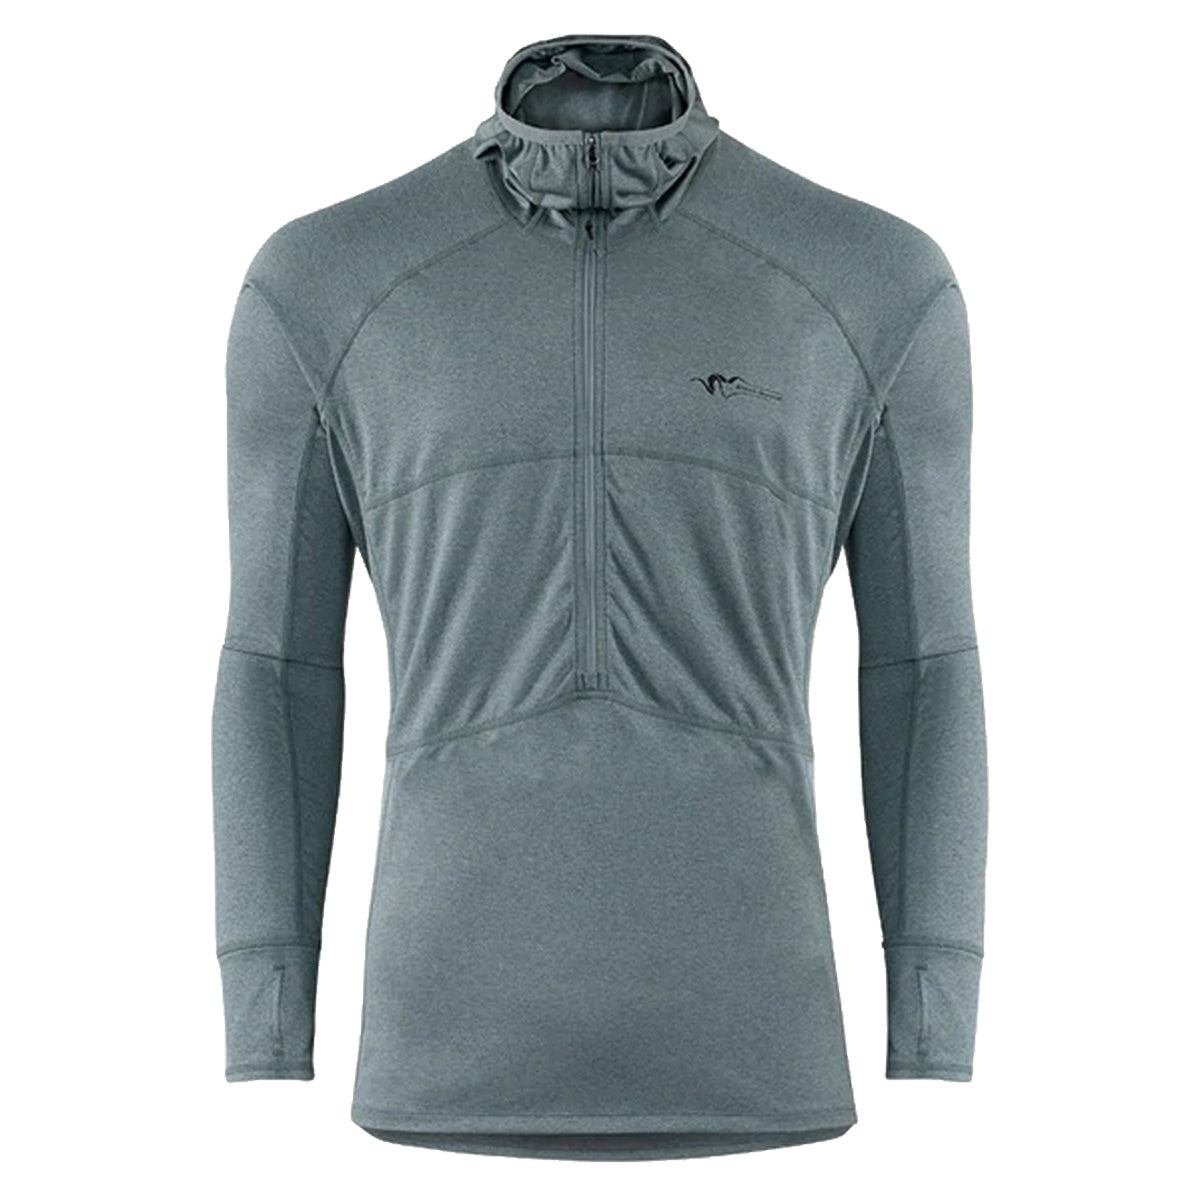 Stone Glacier Avro Synthetic Hoodie in  by GOHUNT | Stone Glacier - GOHUNT Shop